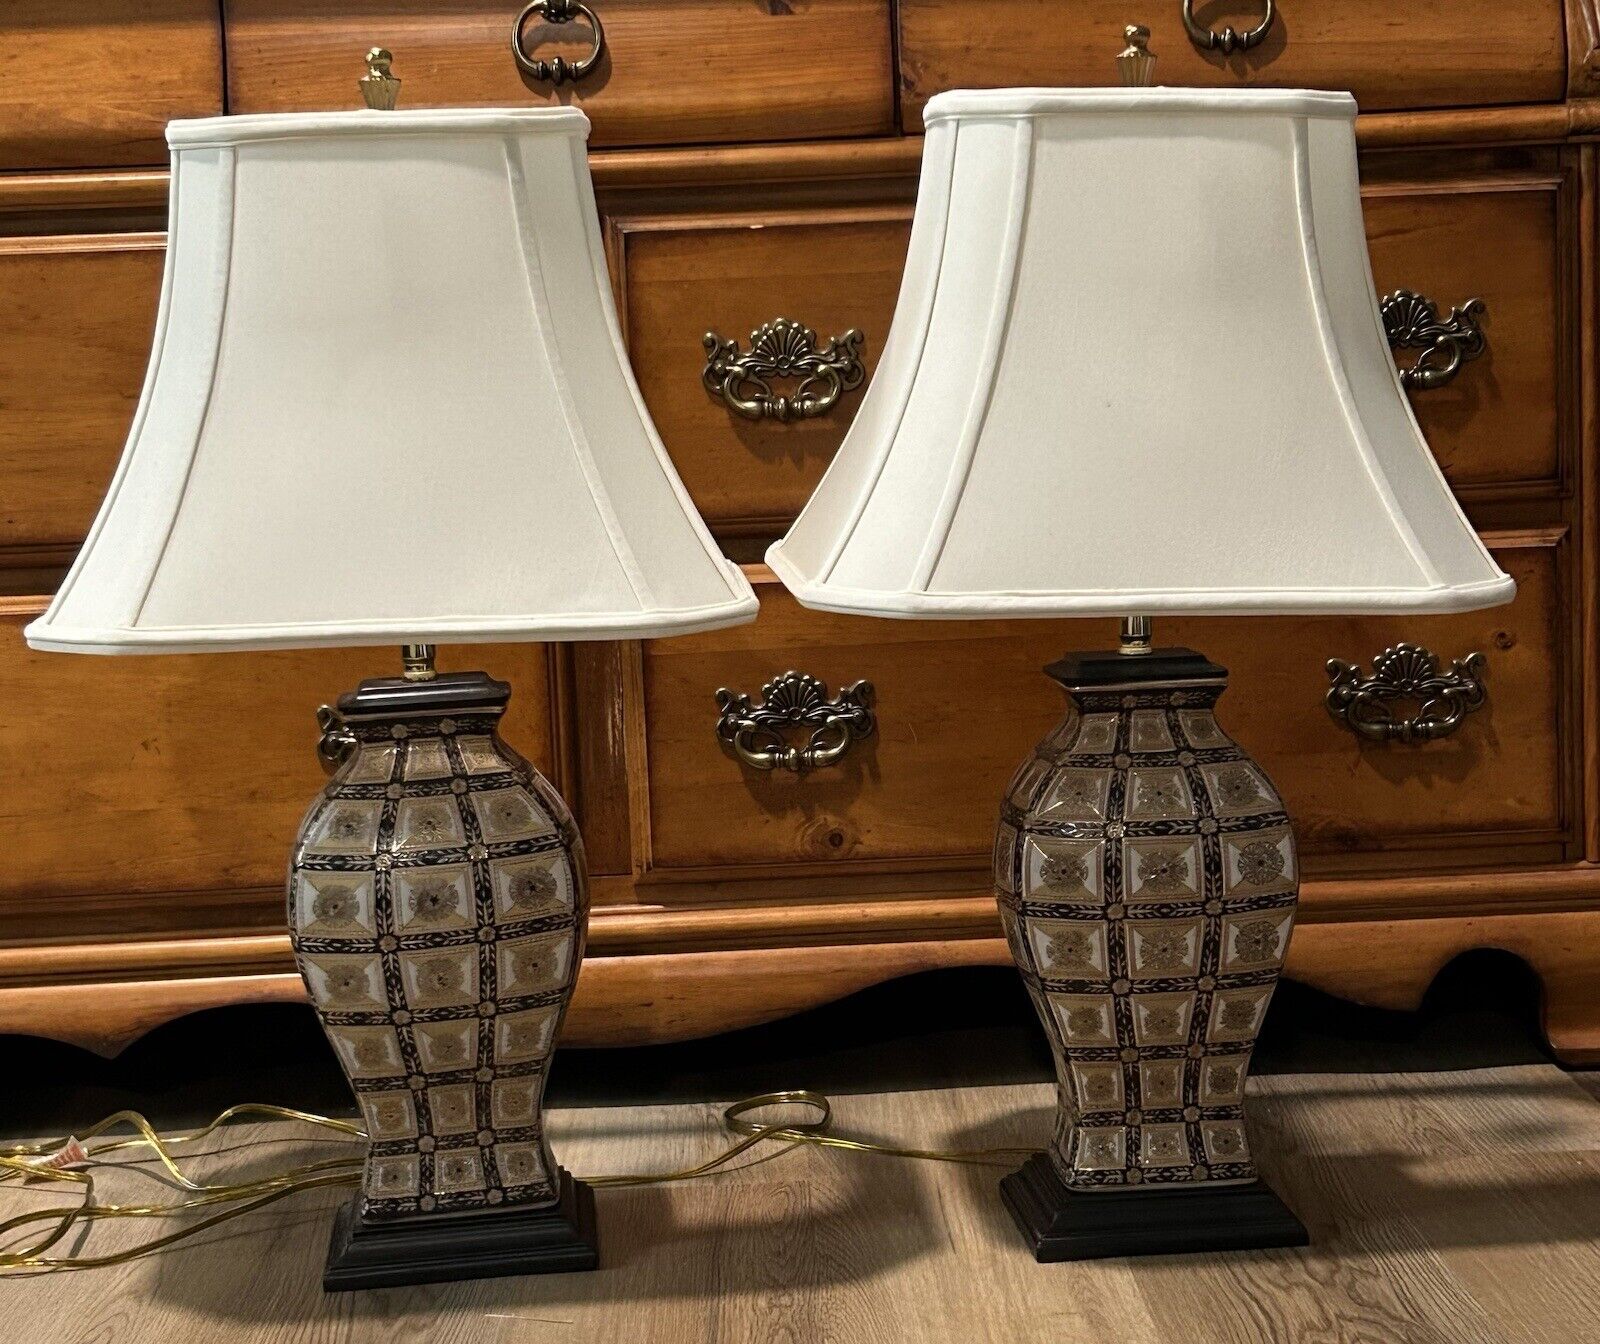 Pair Of Vintage Bombay Co Lamps (refurbished With new Shades, Harps And Wiring)